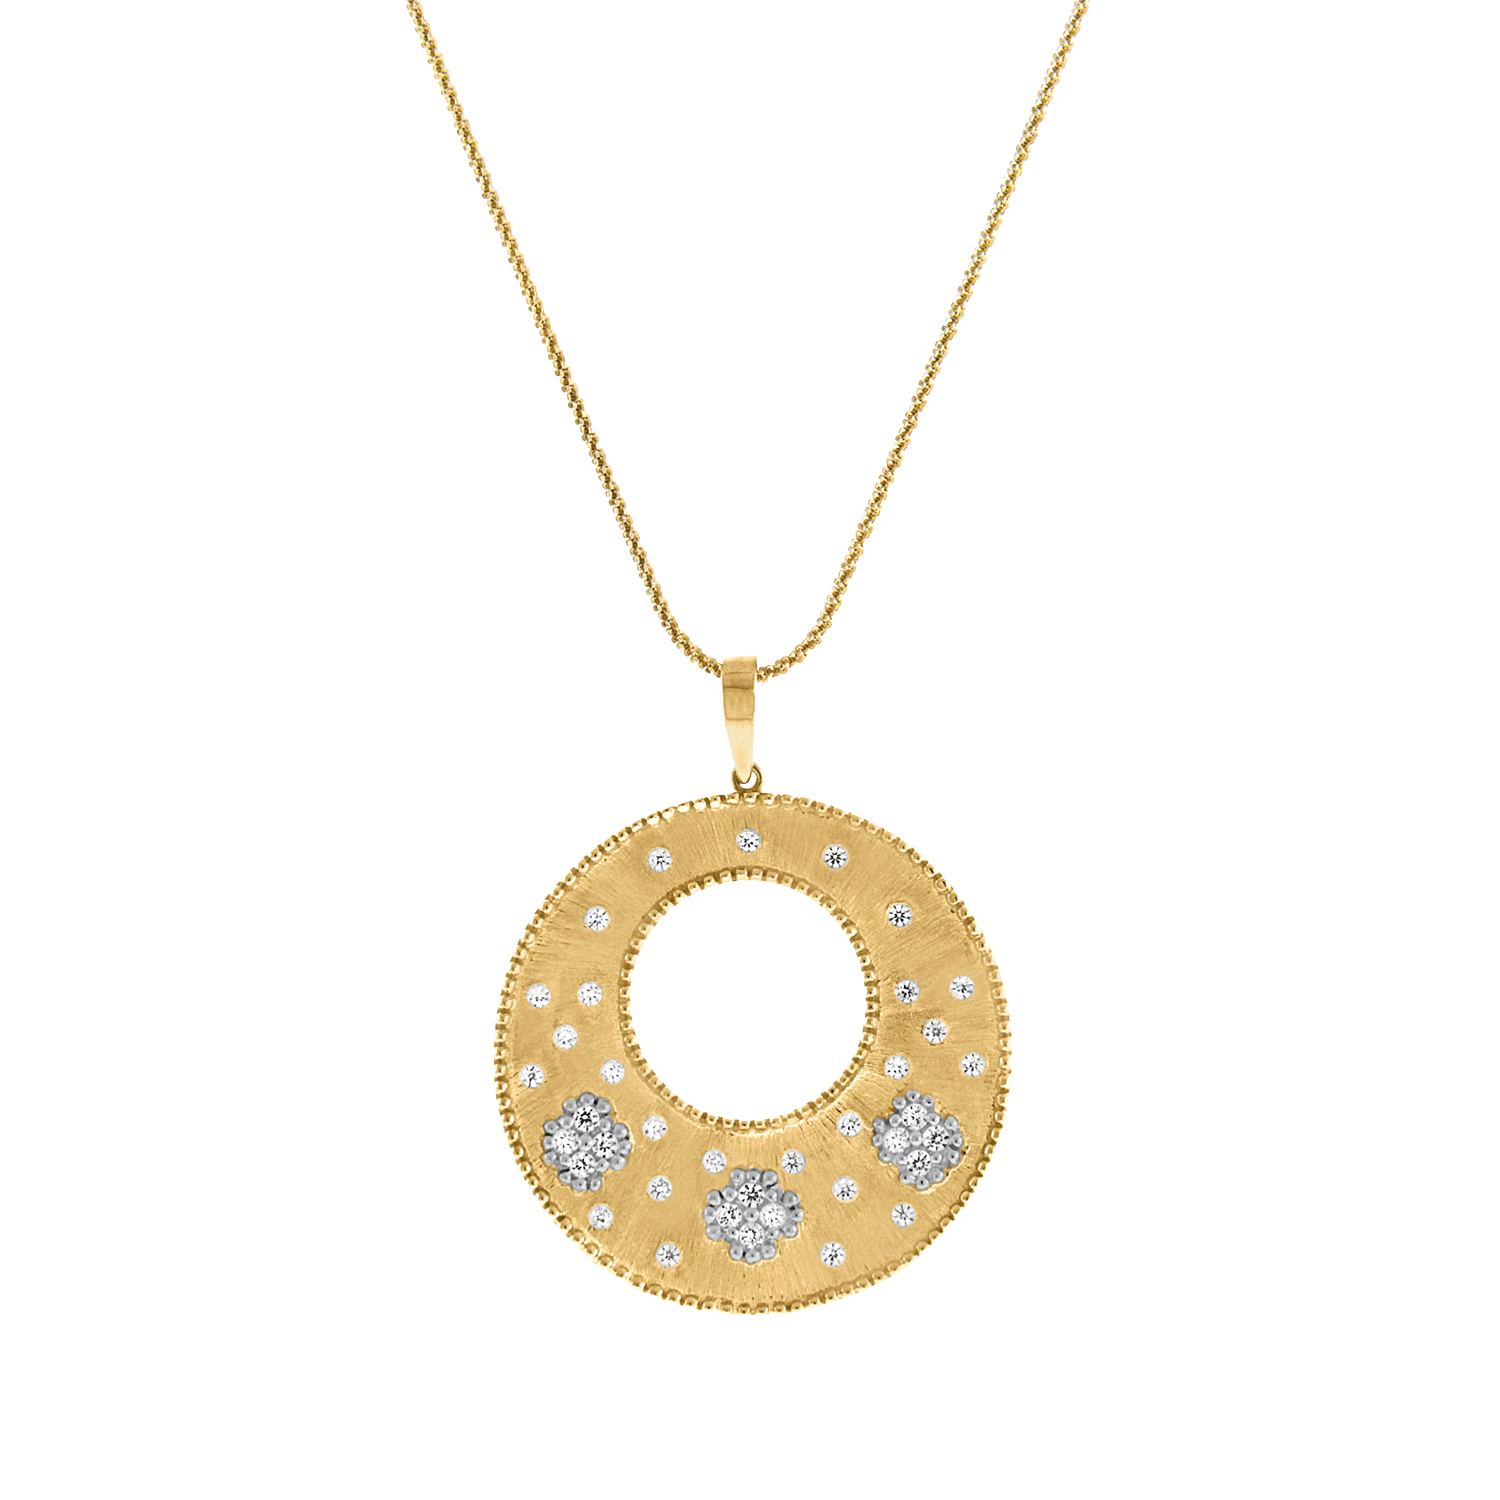 2-Tone Gold Frosted Pendant Necklace with Silver Details